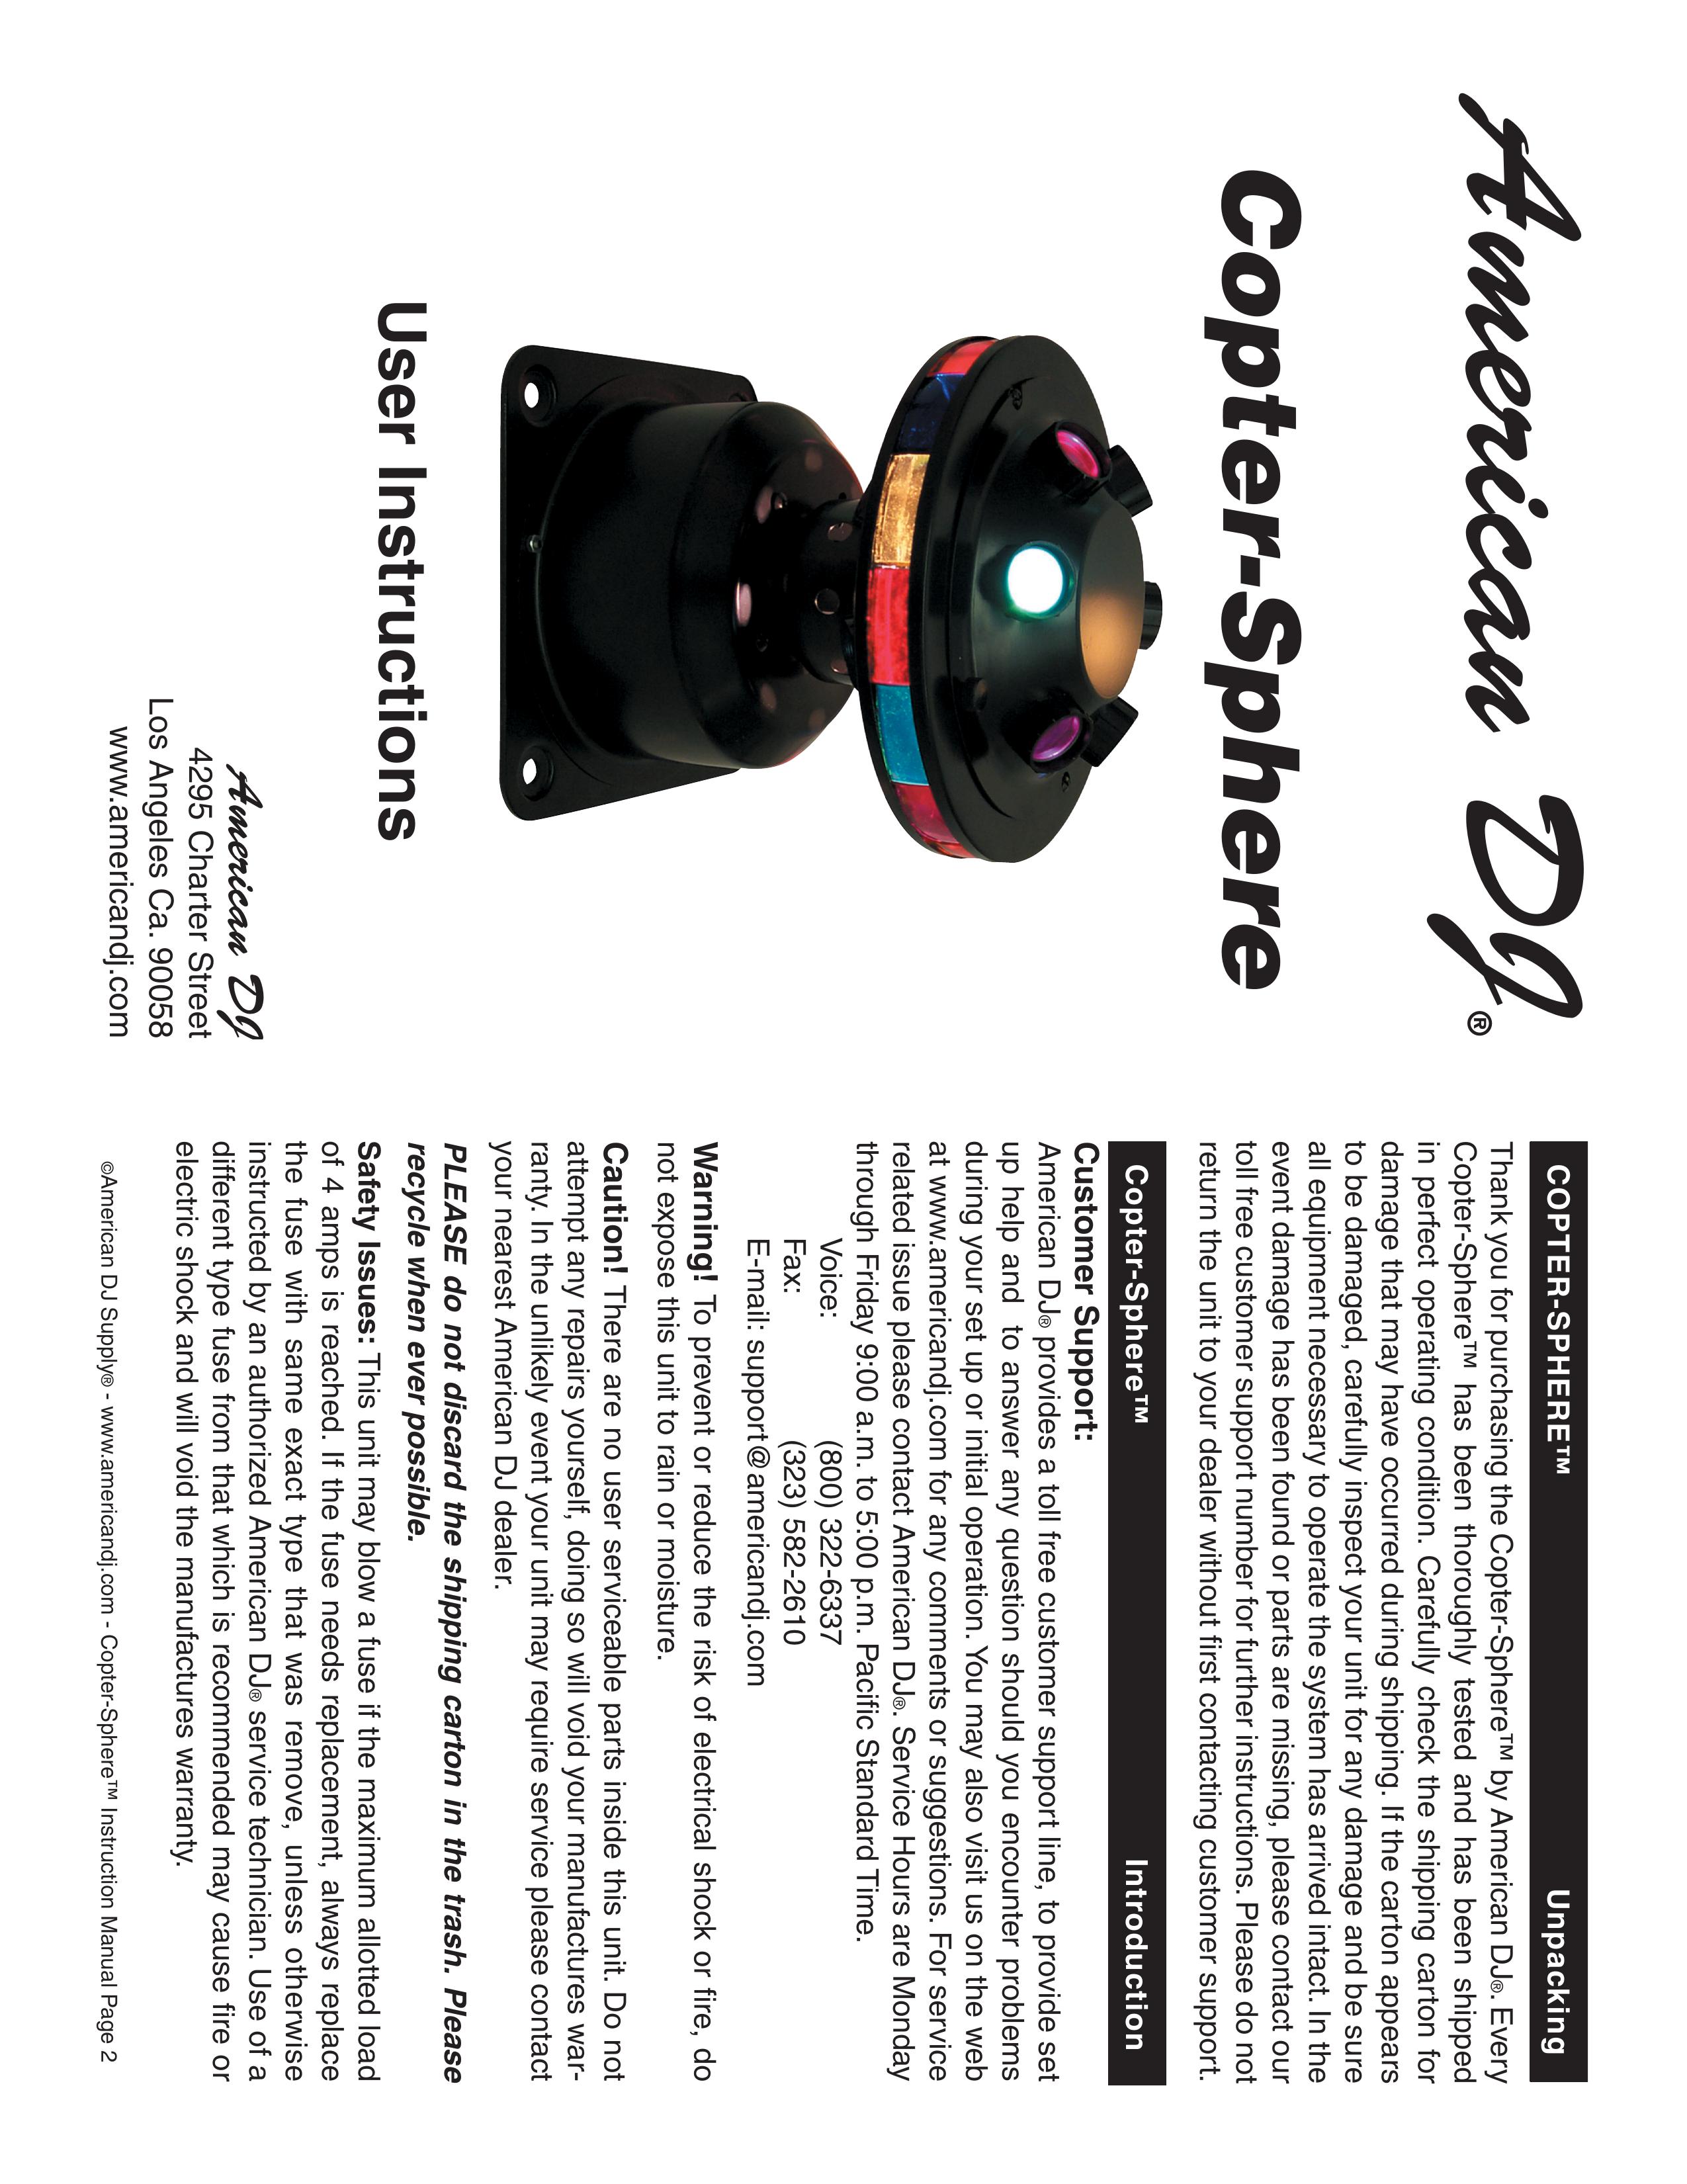 American DJ Copter-Sphere DJ Equipment User Manual (Page 1)